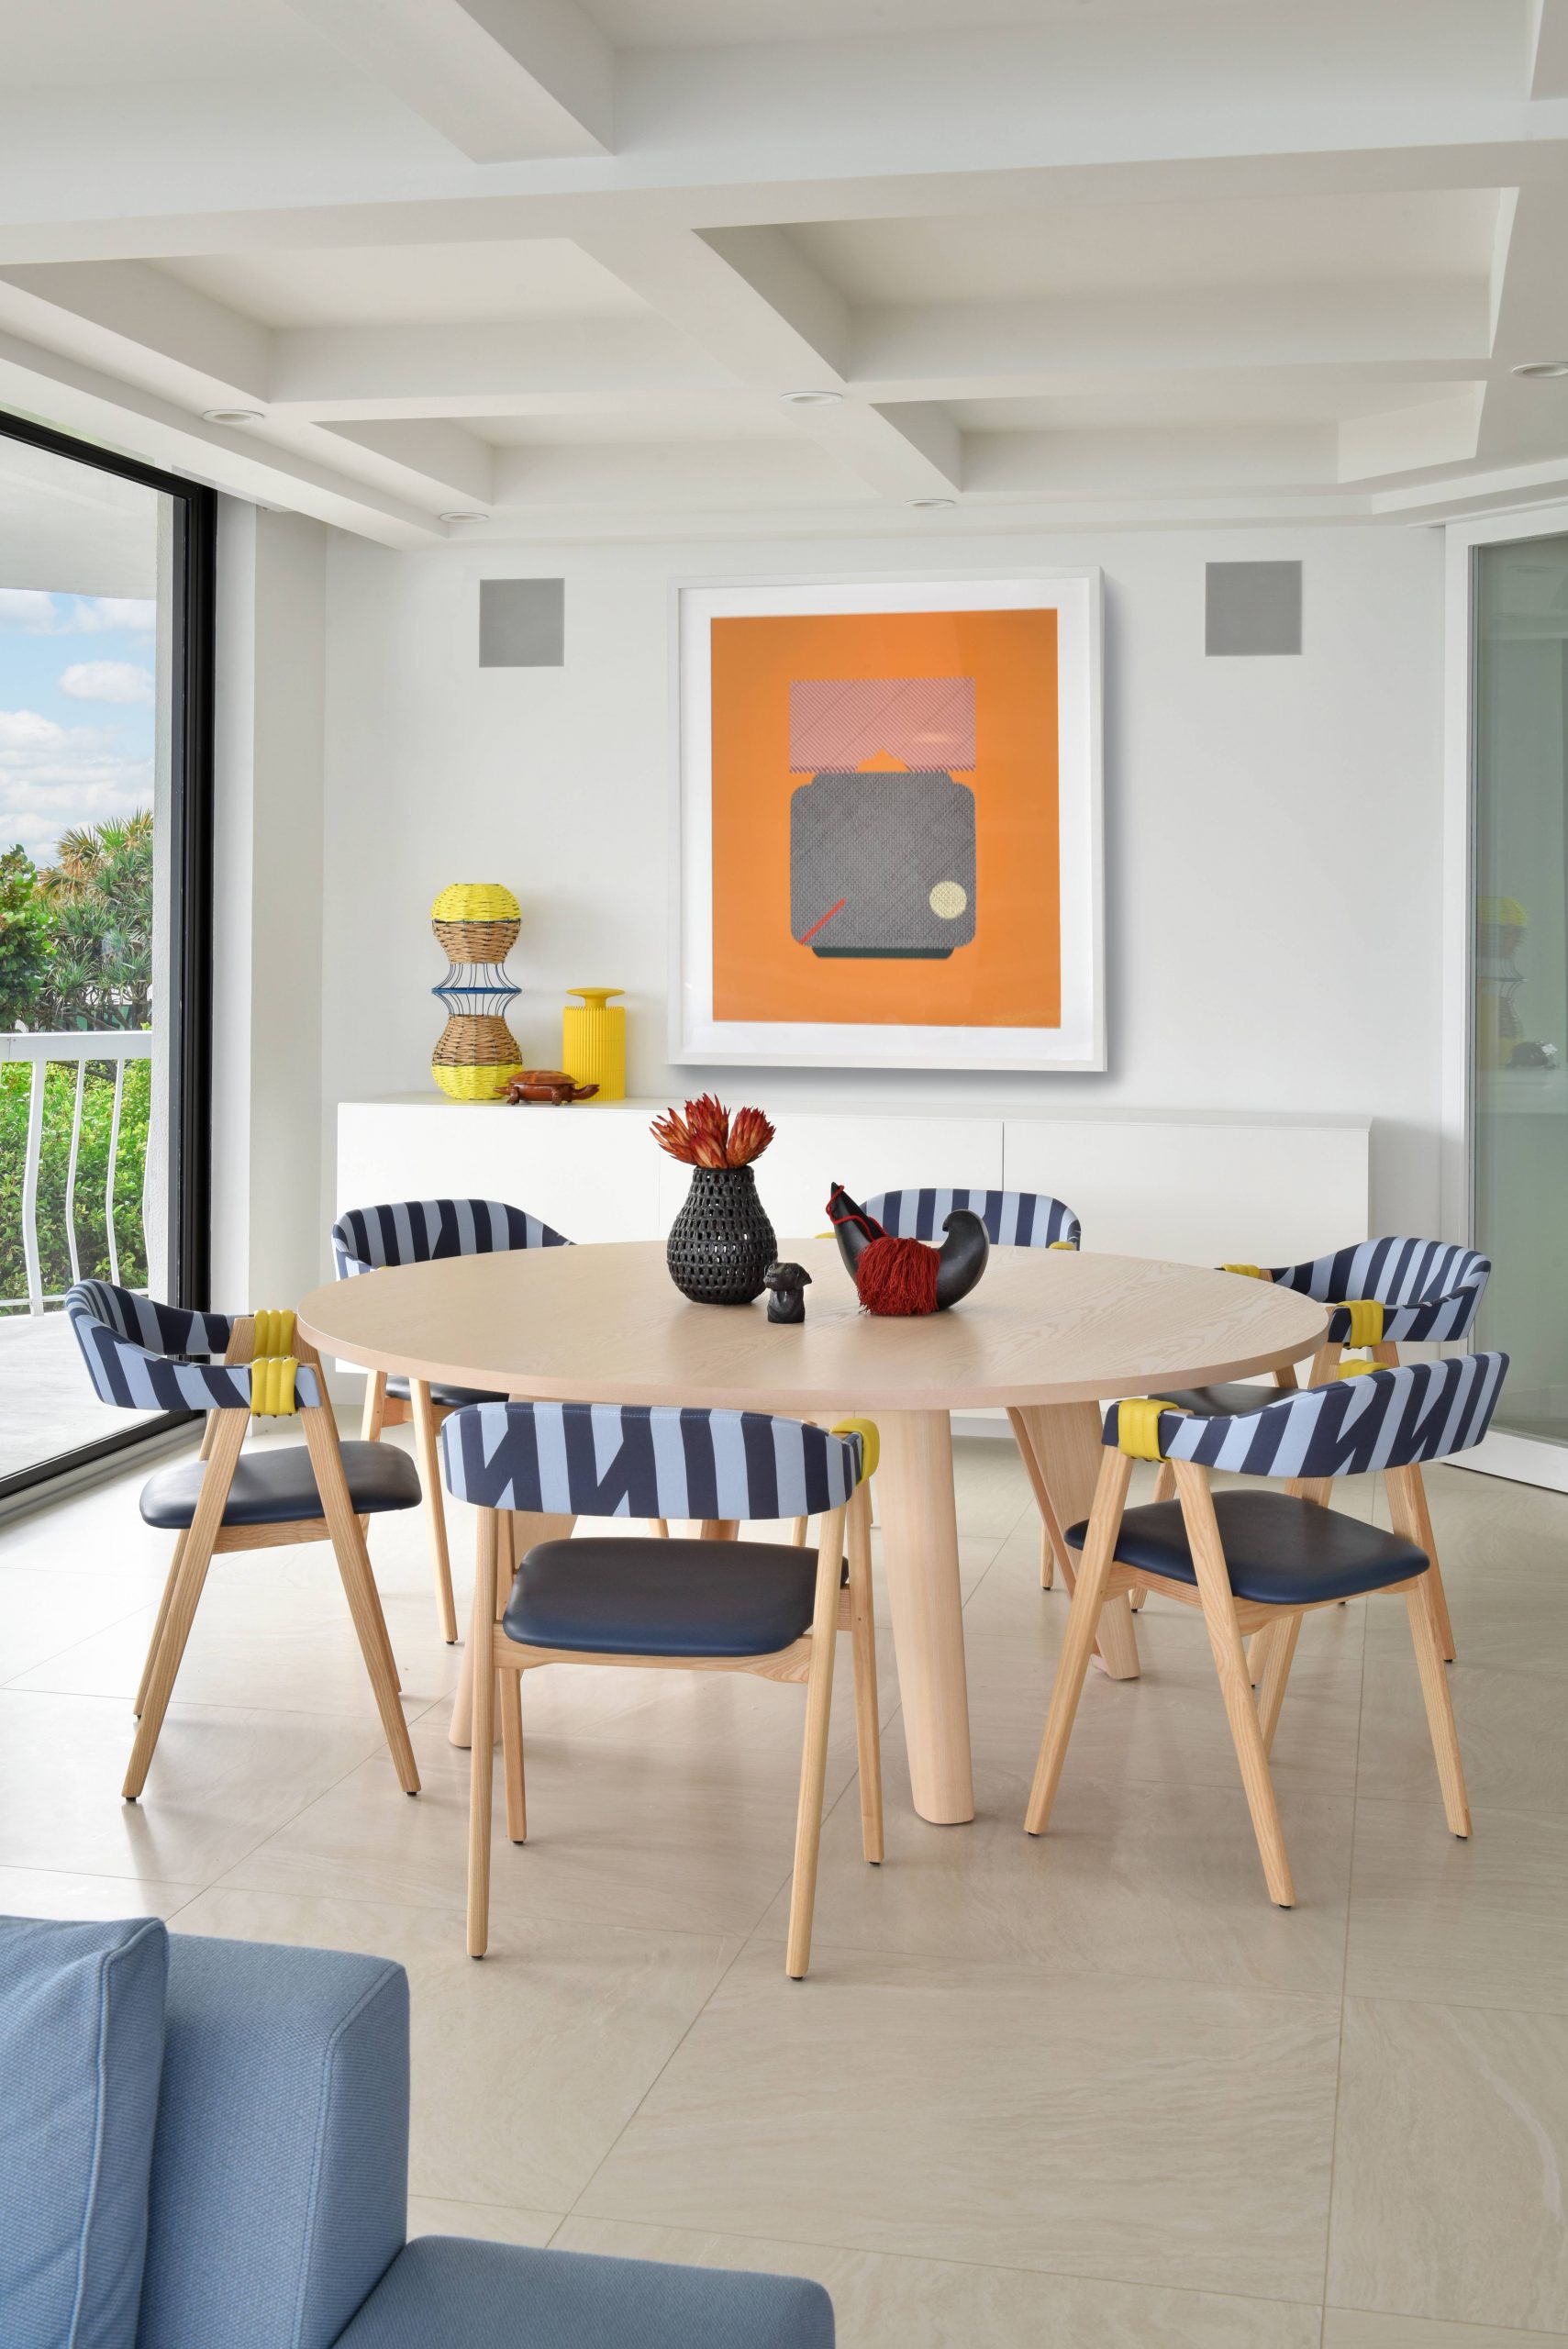 Colorful contemporary dining room design with irreverent artwork on the wall - Ghislaine Viñas: Discover Her Radical Design World  Ghislaine Viñas: Discover Her Radical Design World Ghislaine Vinas The Radicalist Design World PB DiningRoom scaled